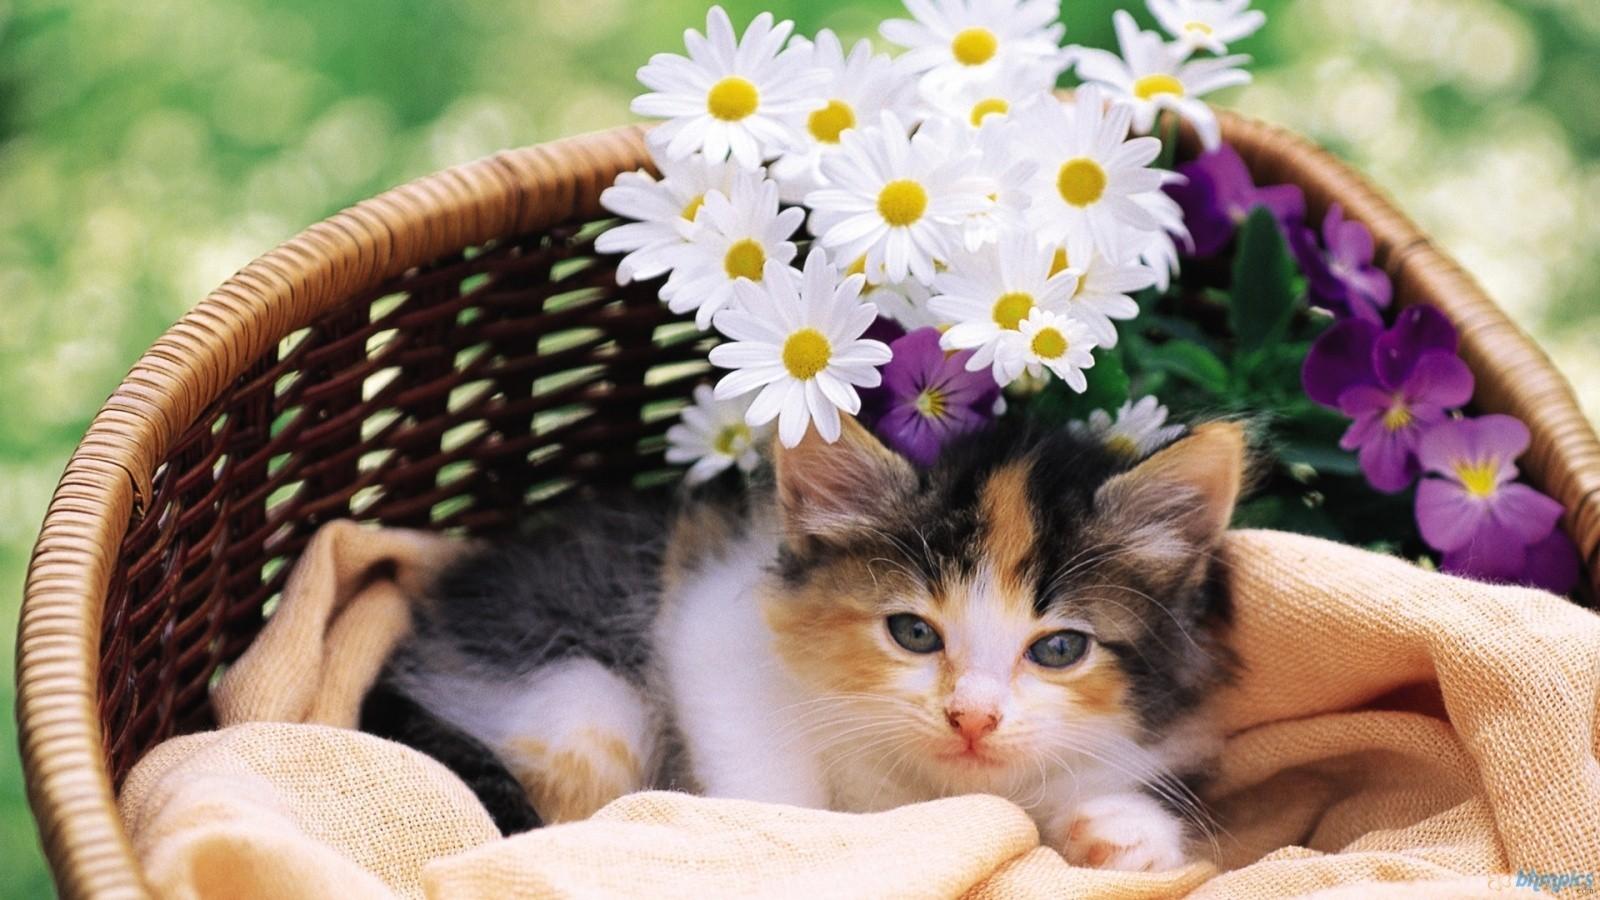 Free download Download Cat And Flower In Basket Wallpaper HQ